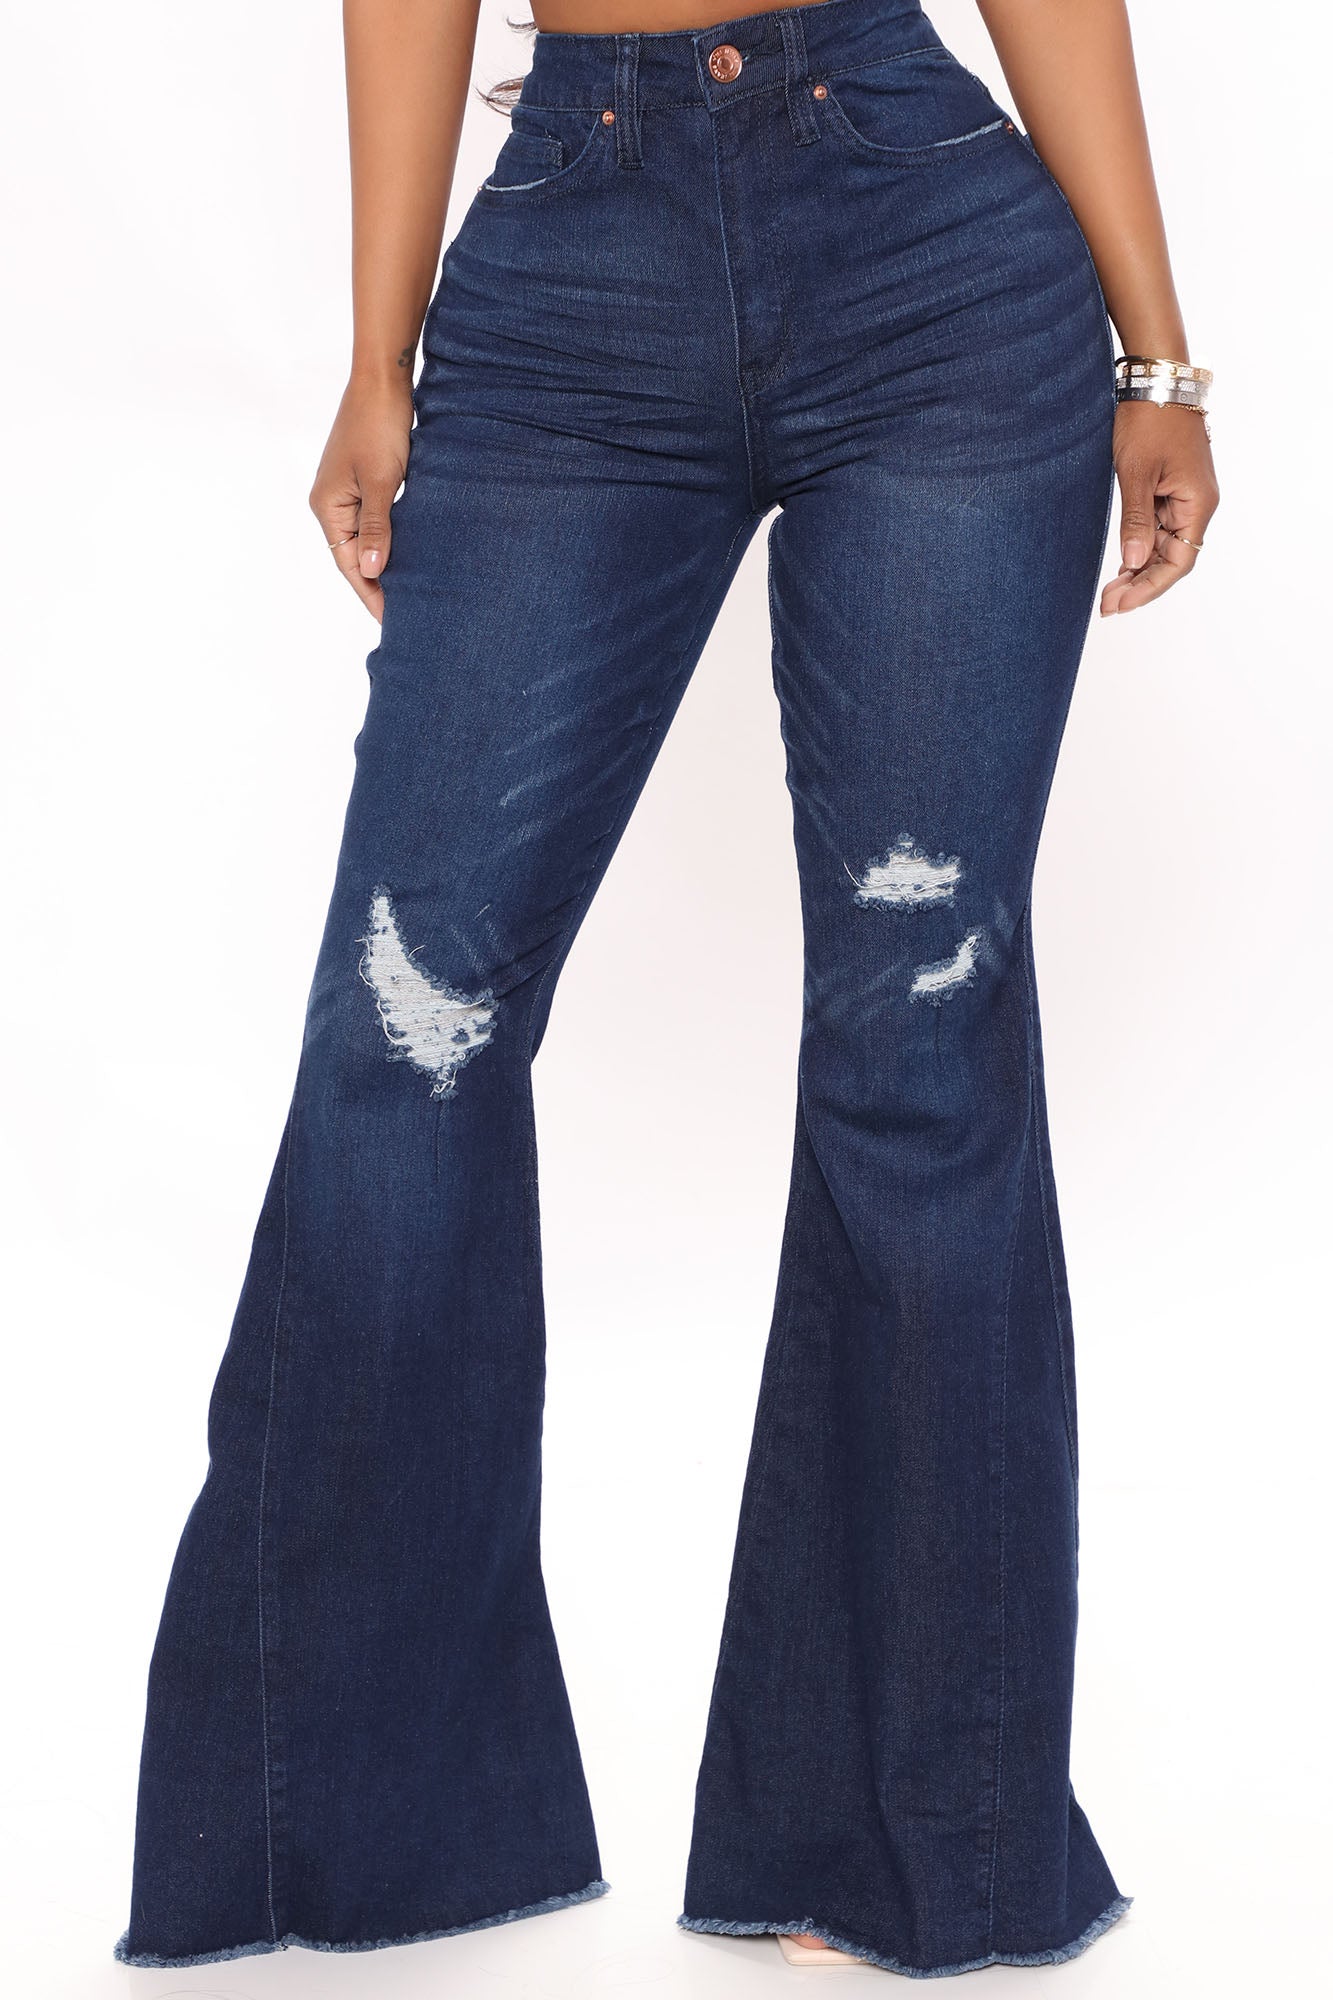 Stay Fearless Extreme Bell Bottom Jeans - Dark Wash